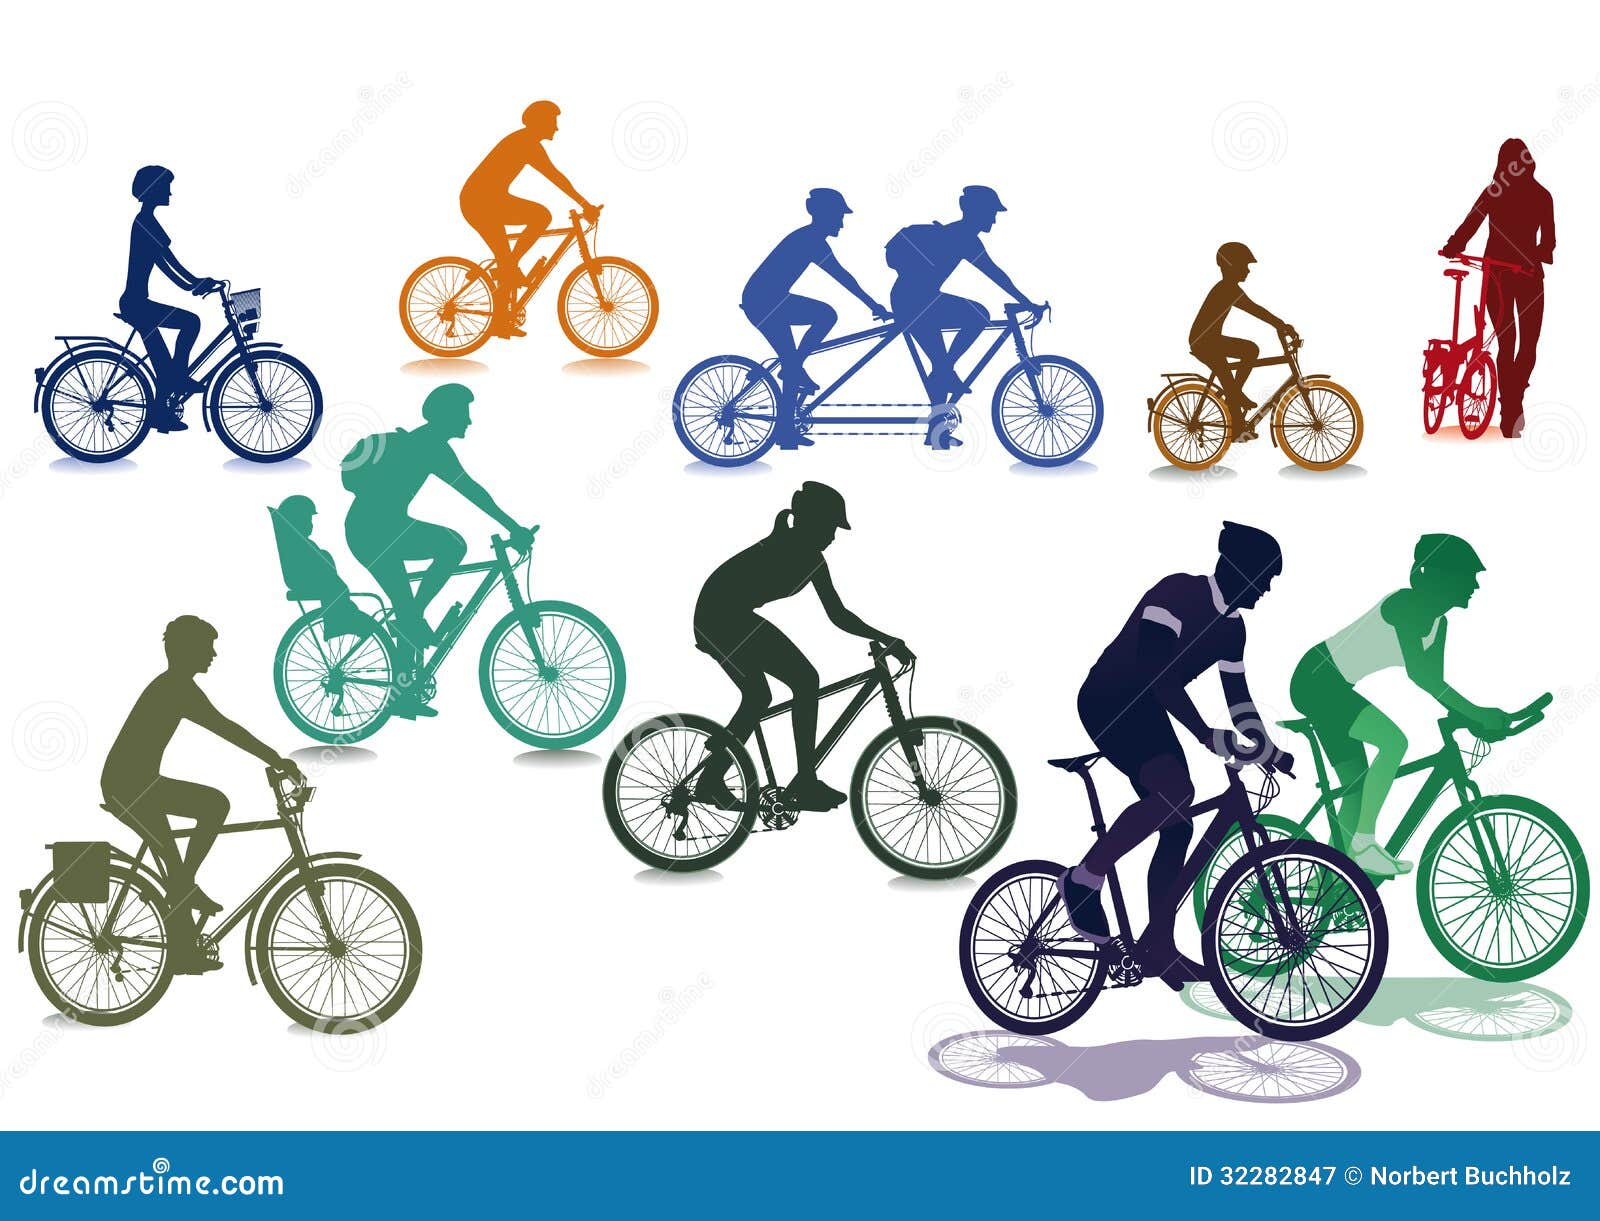 clipart of bike riding - photo #43